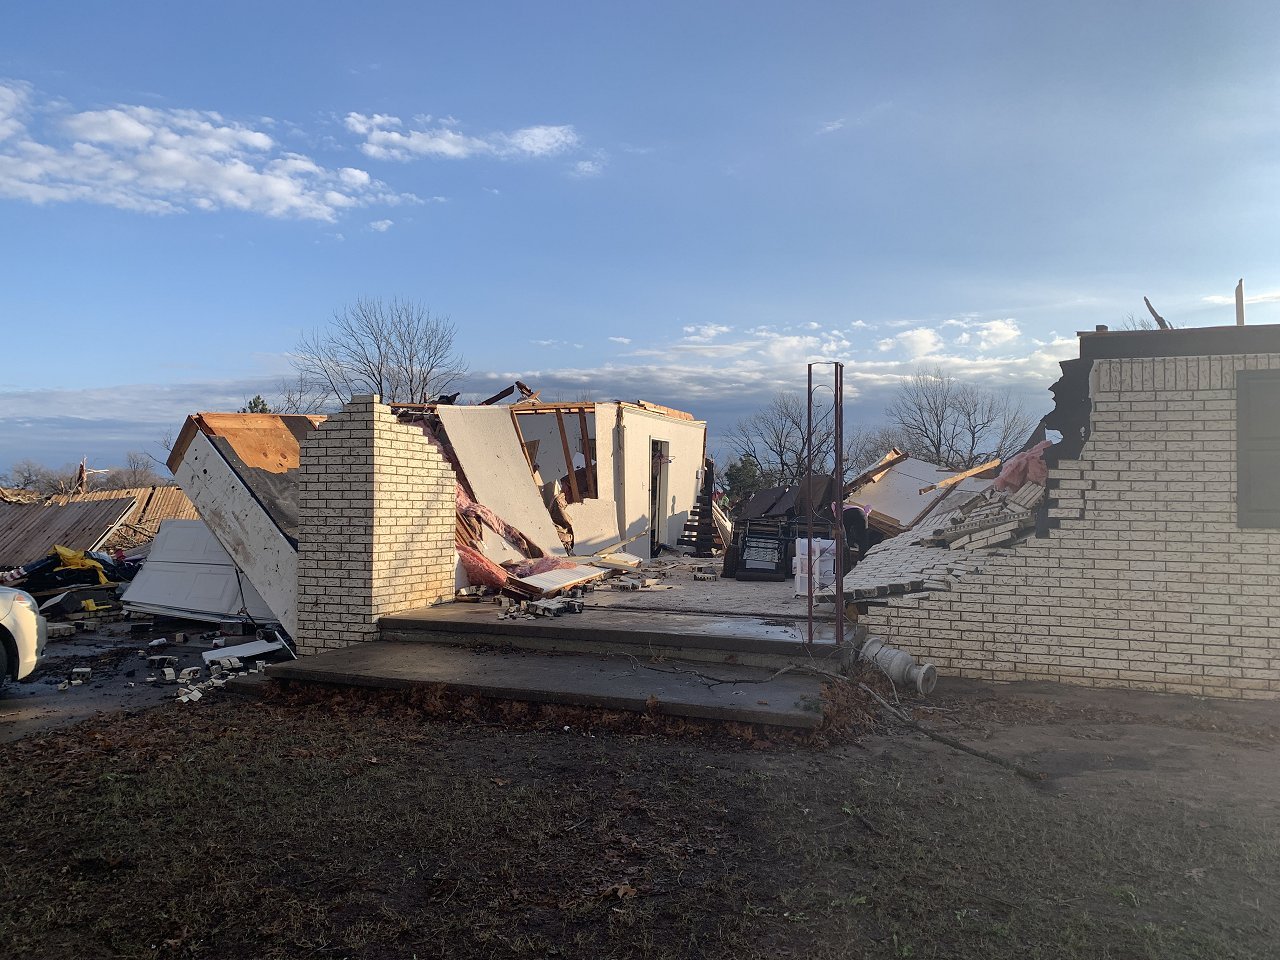 December 13, 2022 - Photo of a damaged home and a workshop about 1 mile north-northeast of Wayne, OK along Nicholas Drive